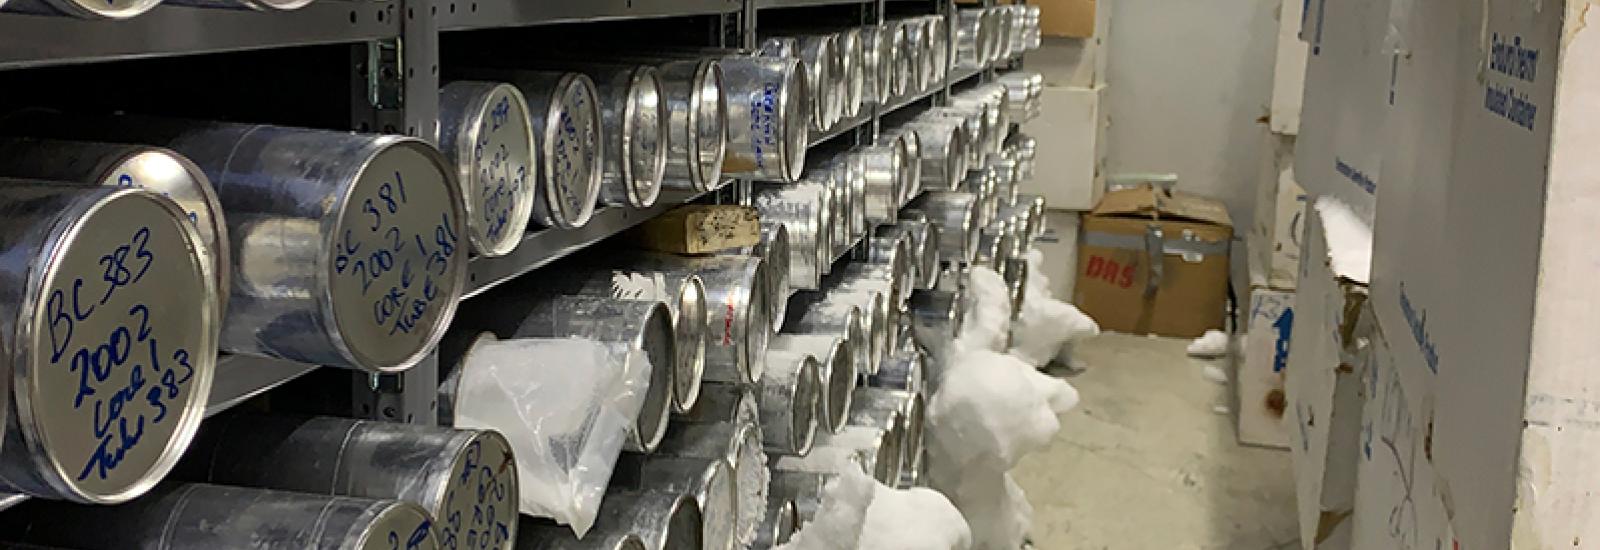 Ice core freezer facility. Ice cores are stored on shelves from floor to ceiling  